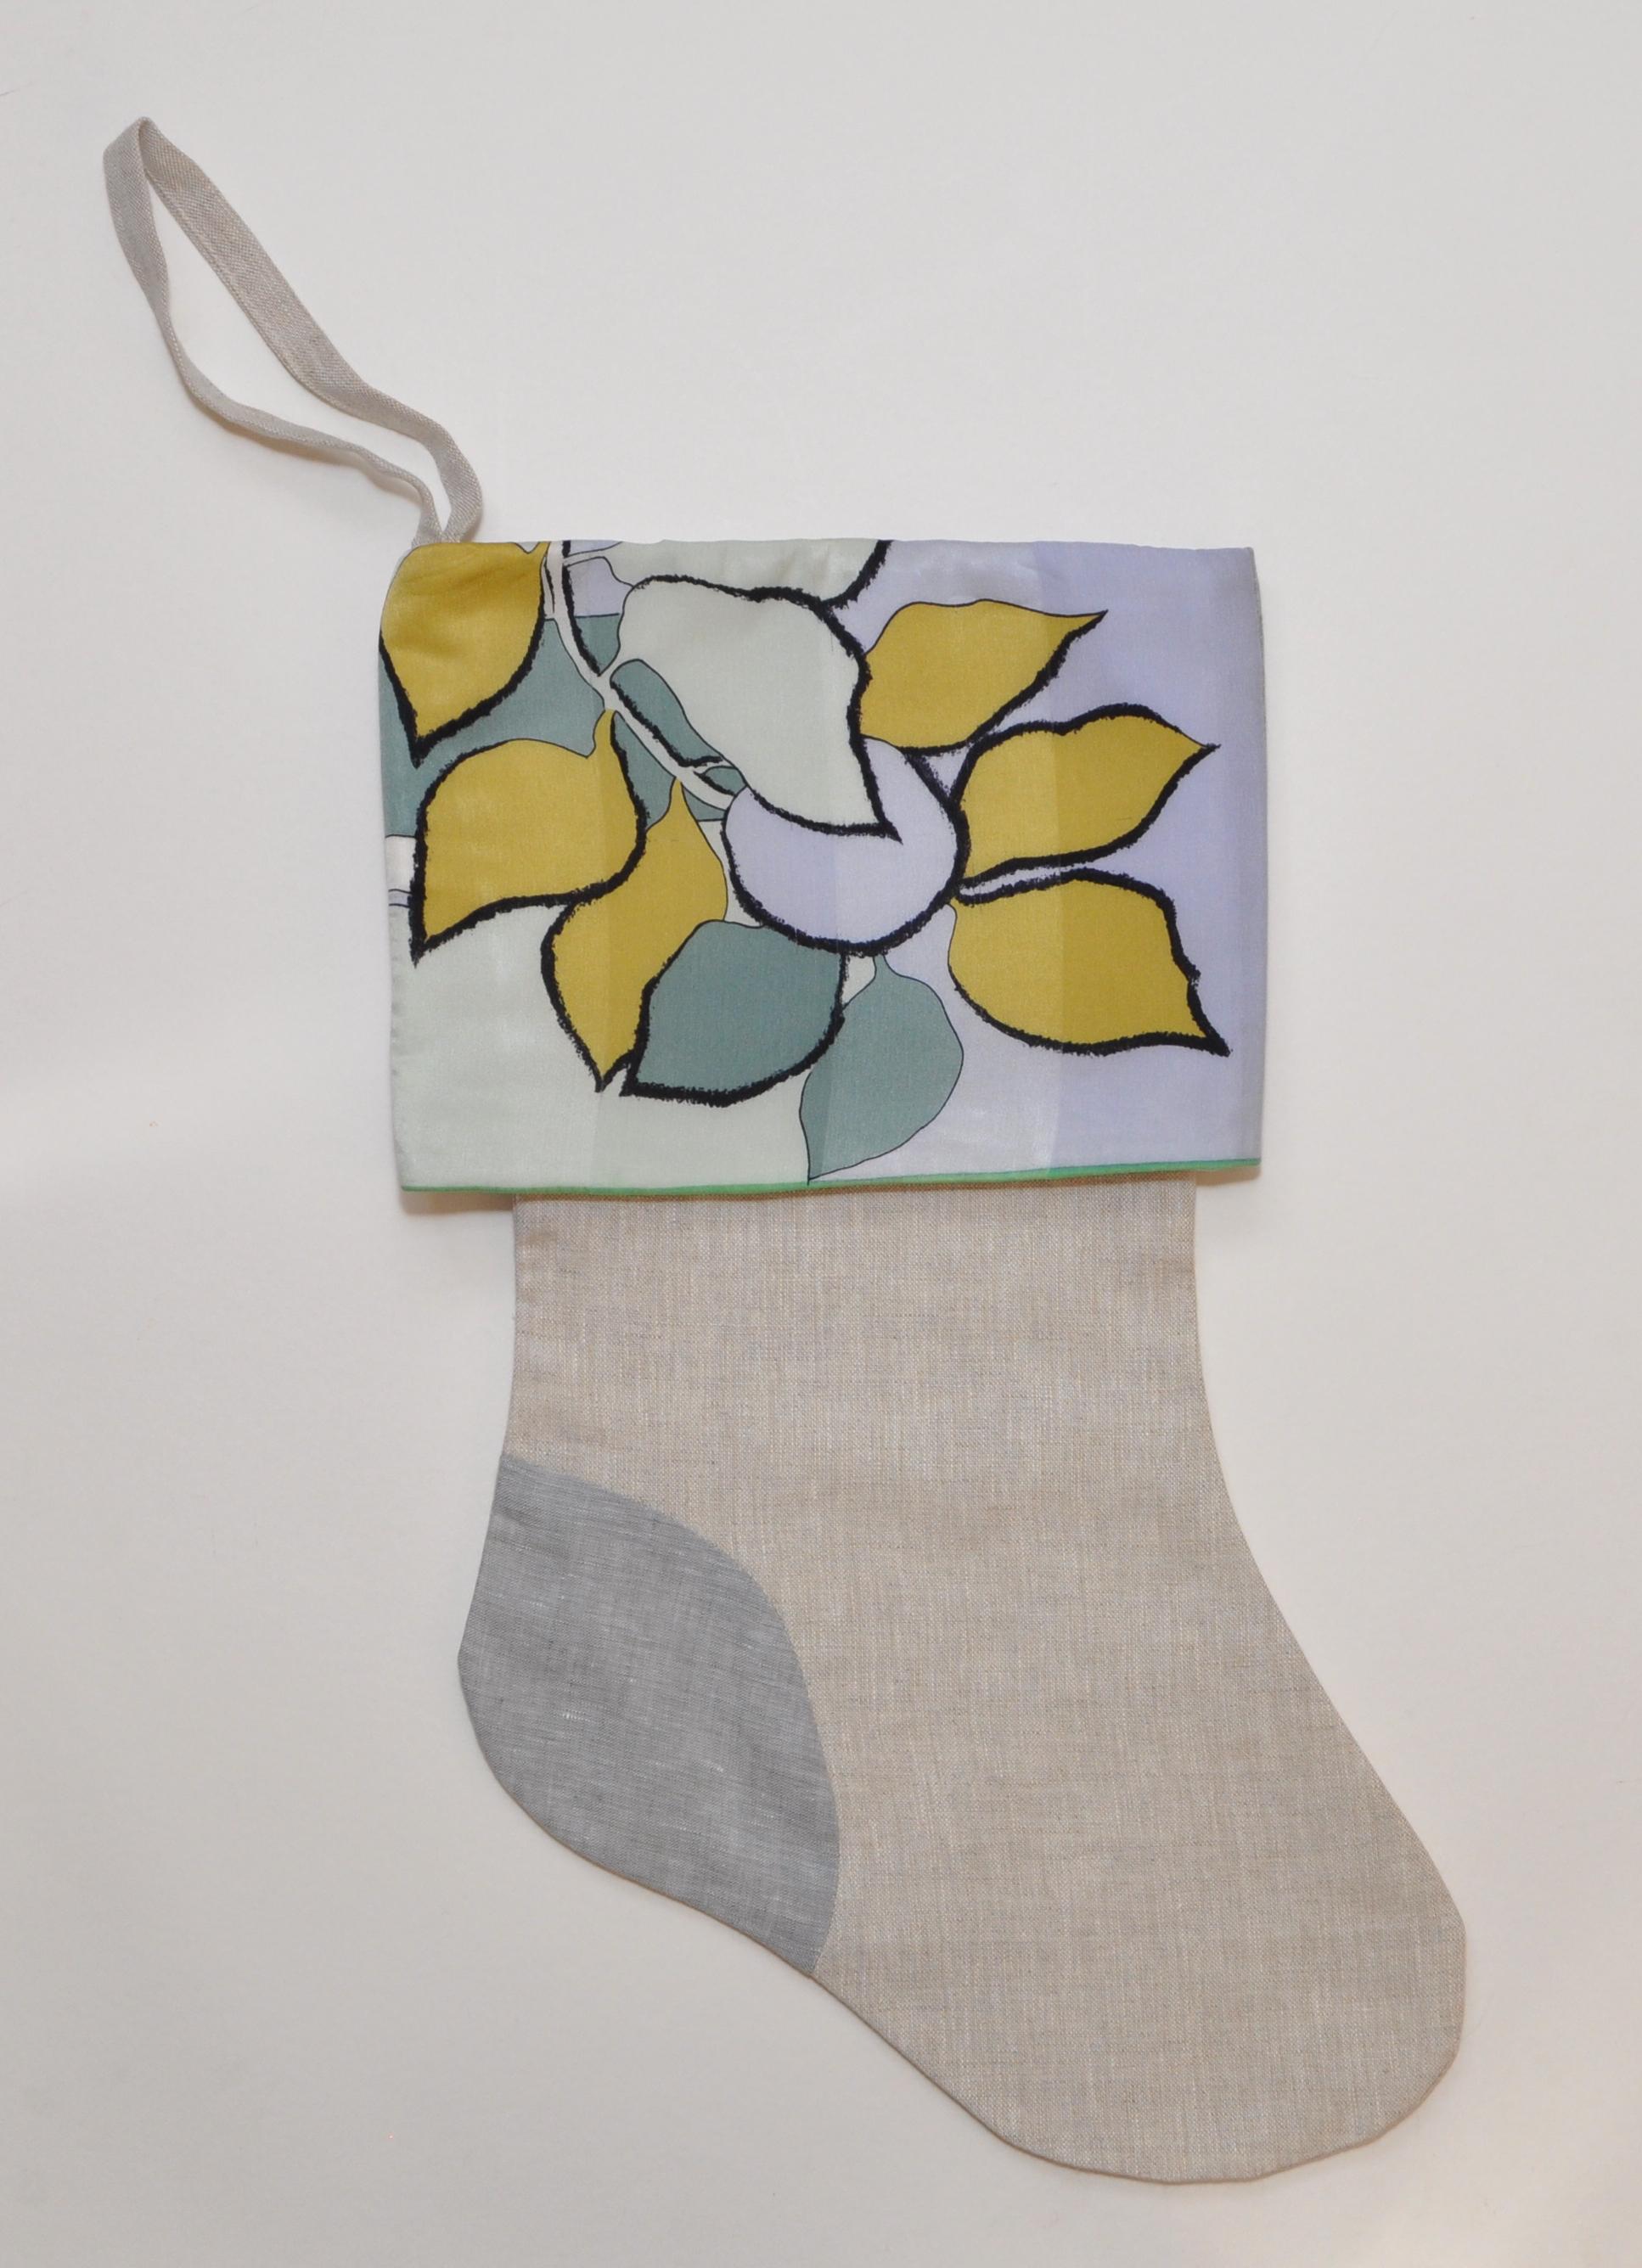 Vintage designer Christian Fischbacher silk scarf Irish linen Christmas stocking blue turquoise green gold

Katie Larmour linen is known for her use of luxury salvaged materials, with this collection, each one-of-a-kind Christmas stockings has been